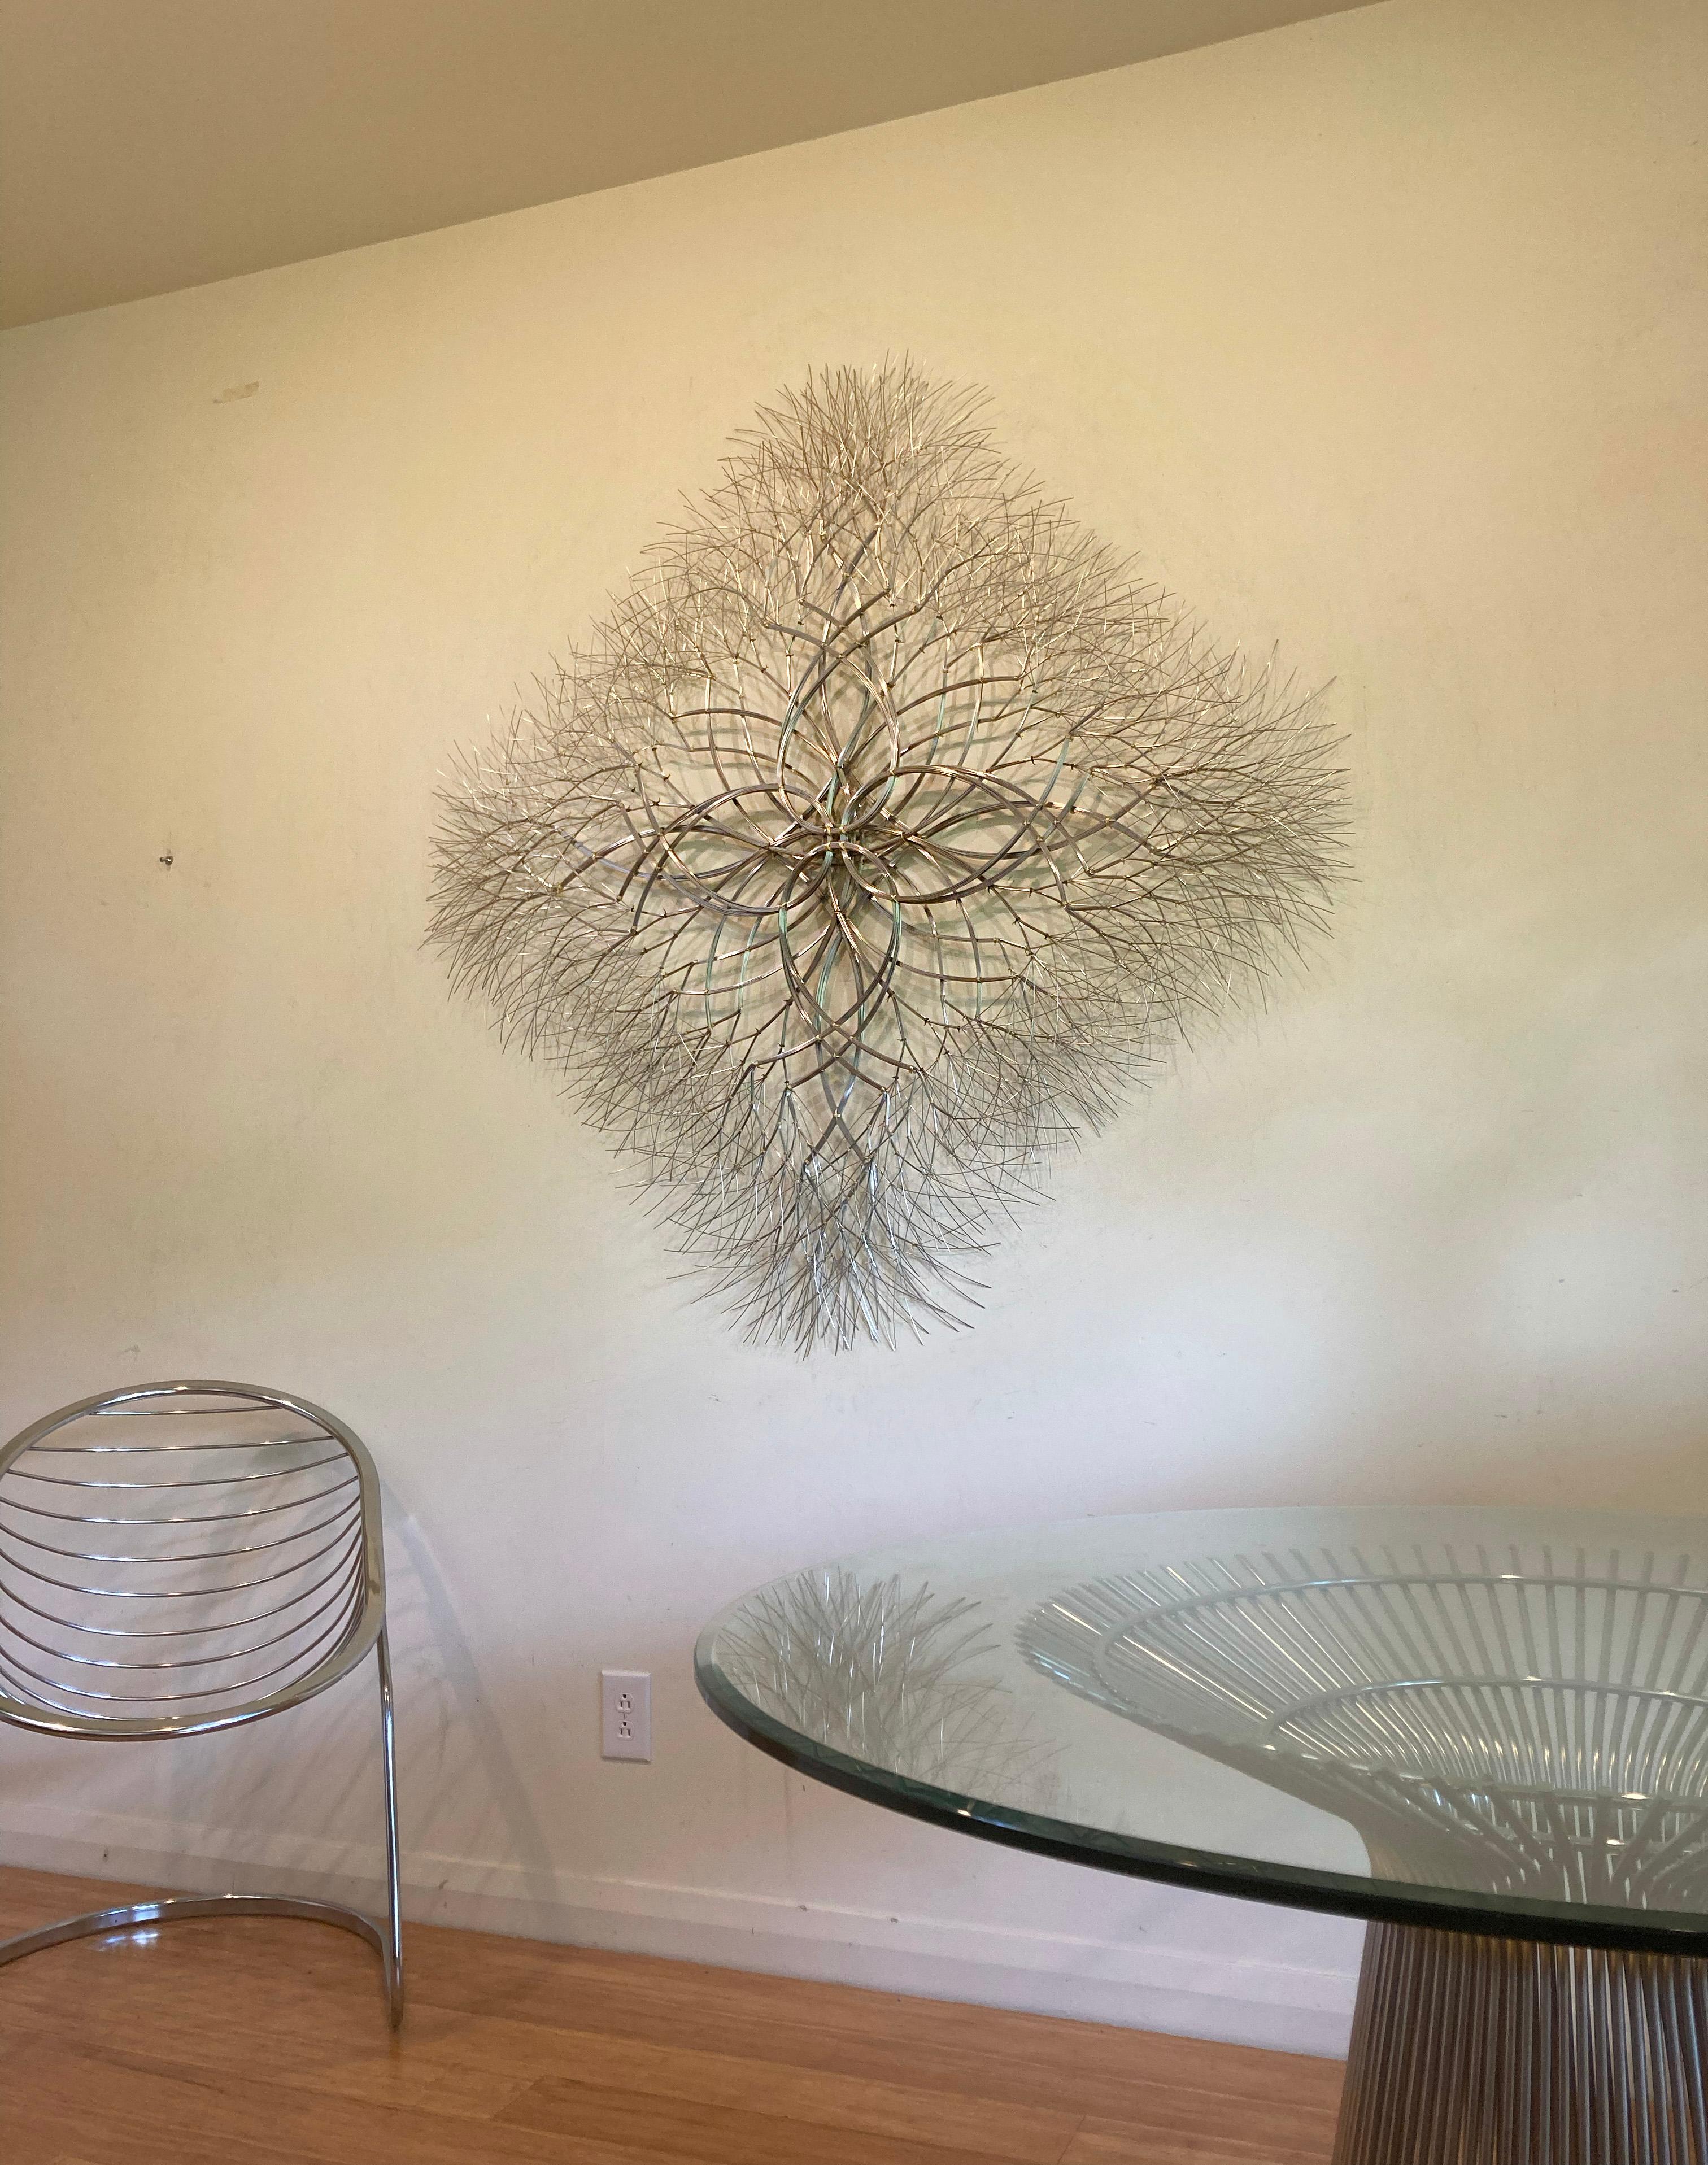 This abstract geometric sculpture by Kue King is created using stainless steel wire. Kue uses an aesthetic reminiscent of trees, electricity, and light to create sculptures of peace and beauty. Adults and children alike see snowflakes, stars,